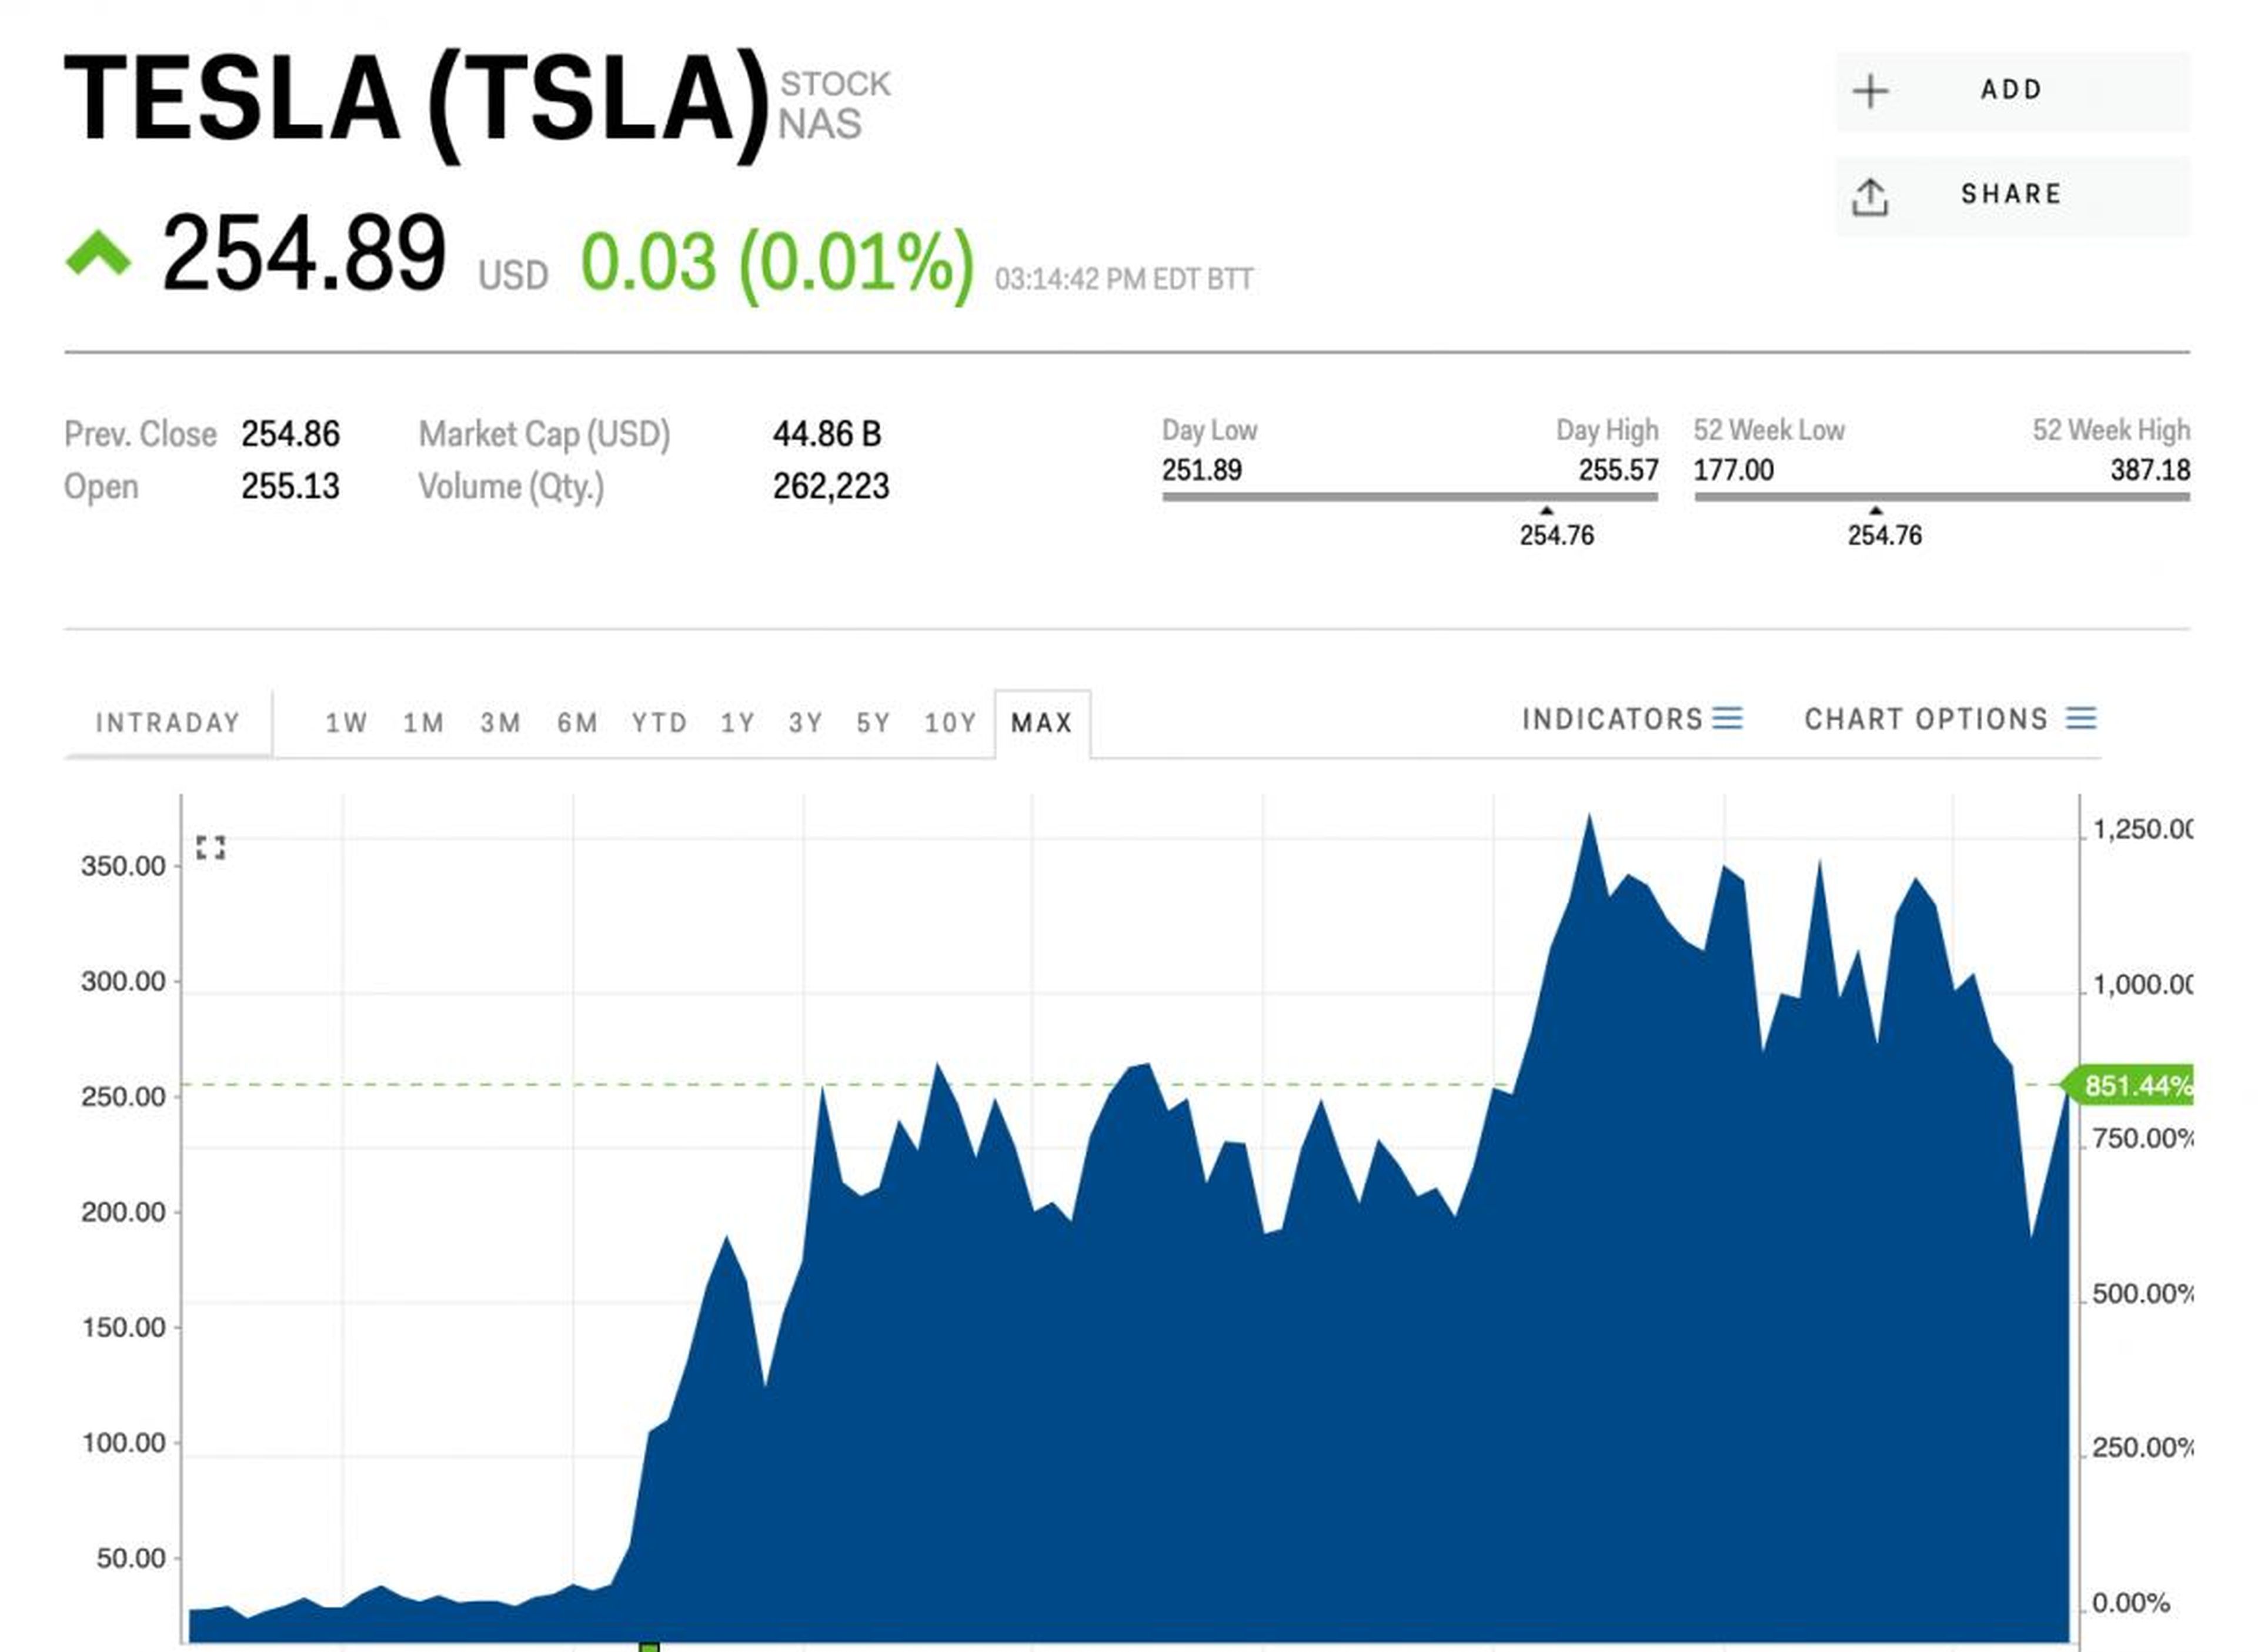 Tesla has been a great investment for early buyers of the stock.